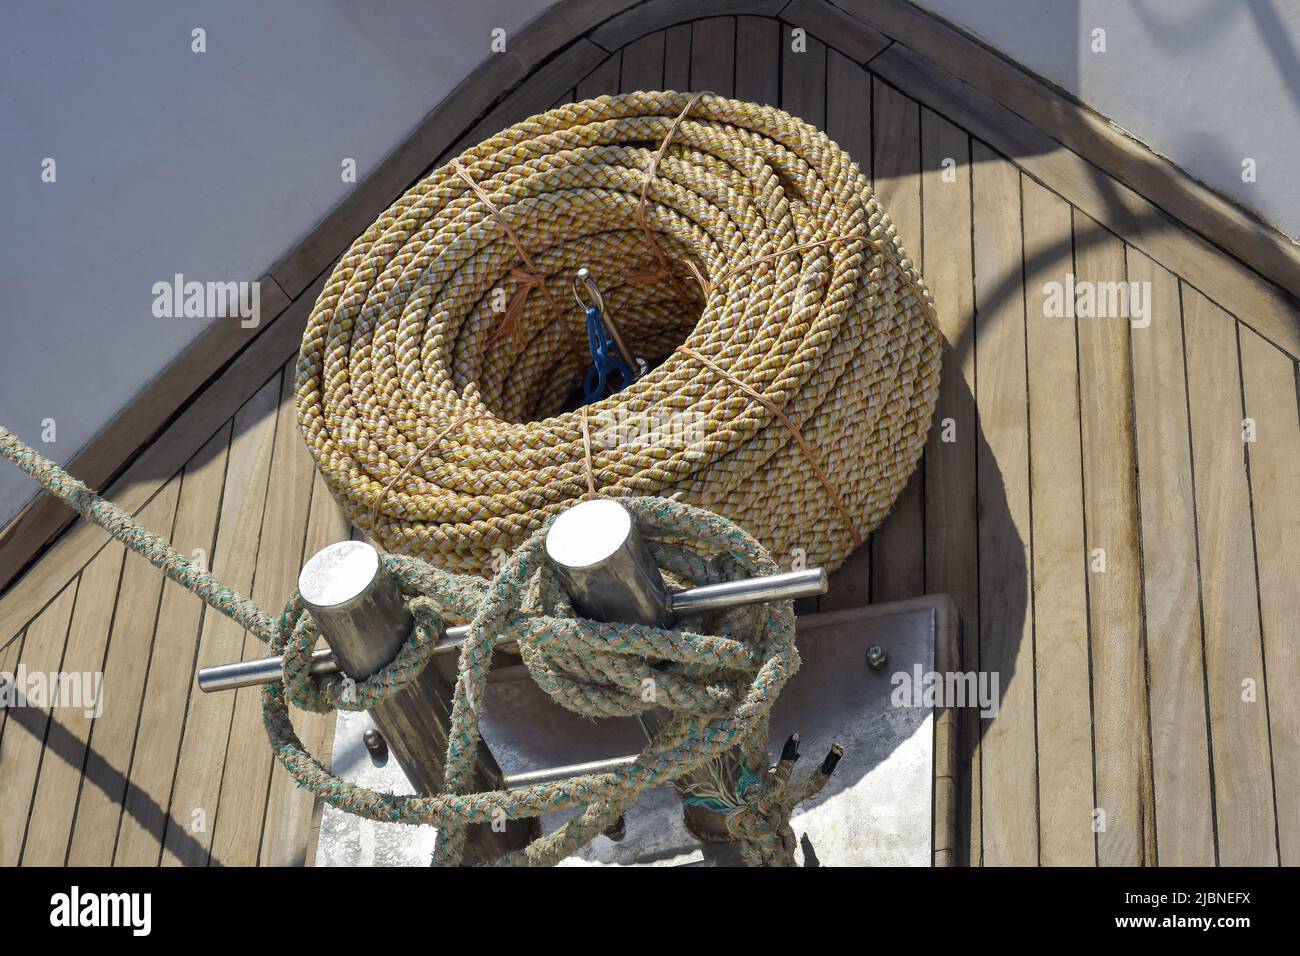 Bow of white yacht. Bay with thick rope lies on wooden deck. Rope is wound on mooring post of yacht. Top view. Close-up. Selective focus. Stock Photo